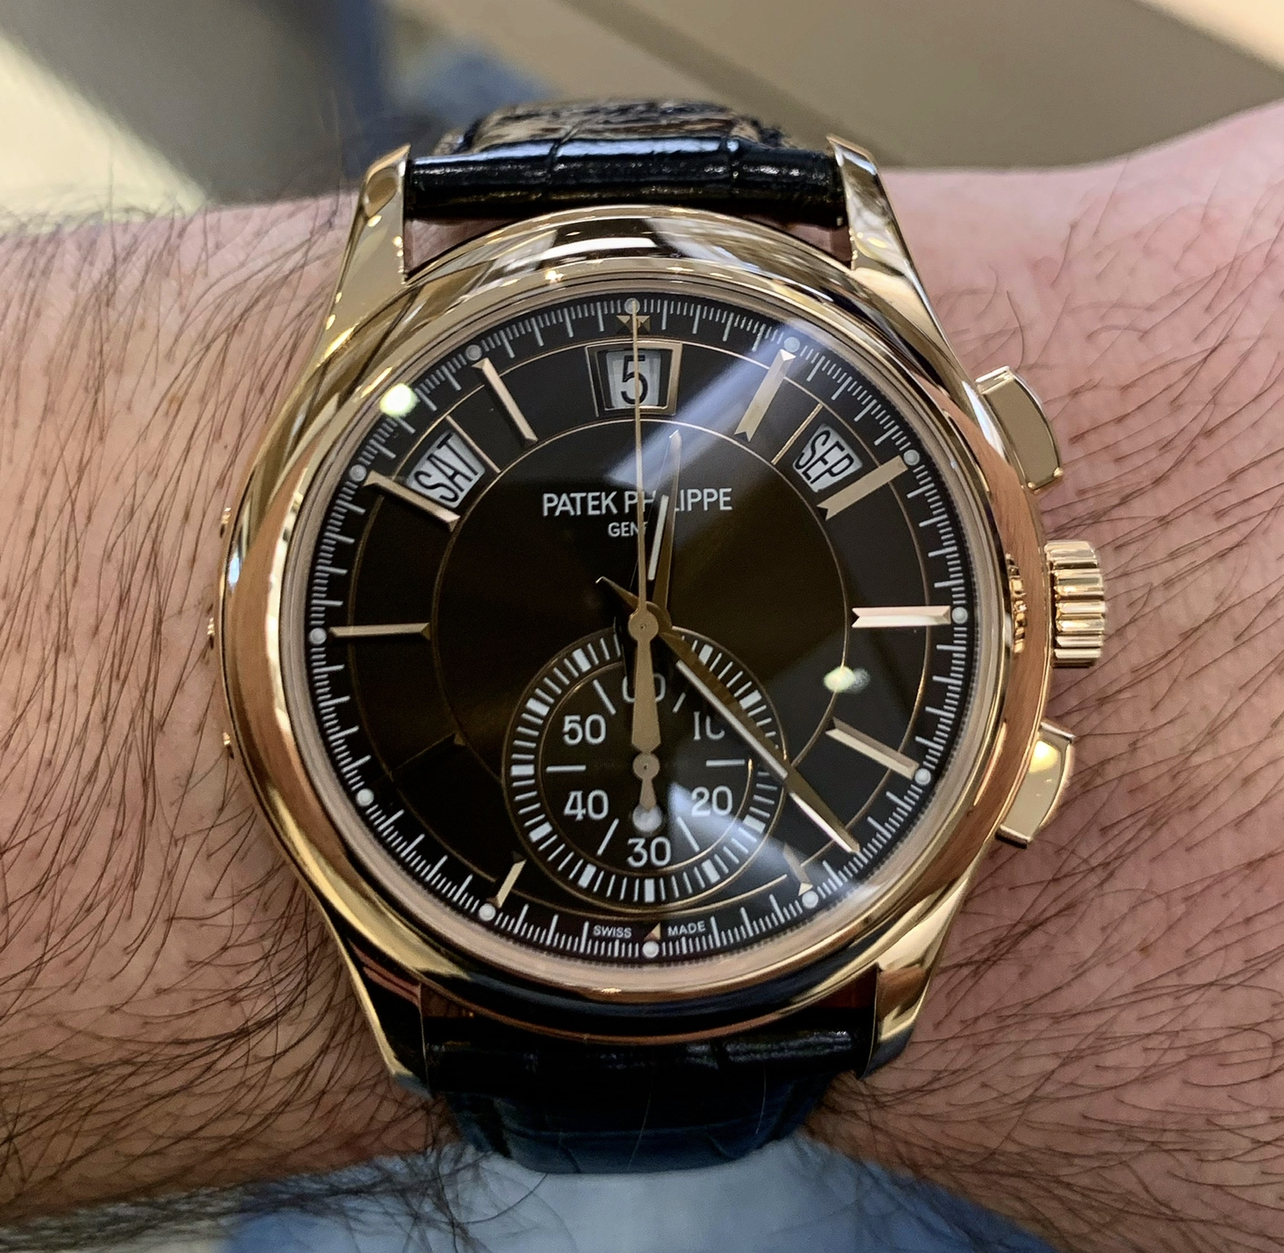 What Side Do Men Wear Watches? – Atlas Watches London